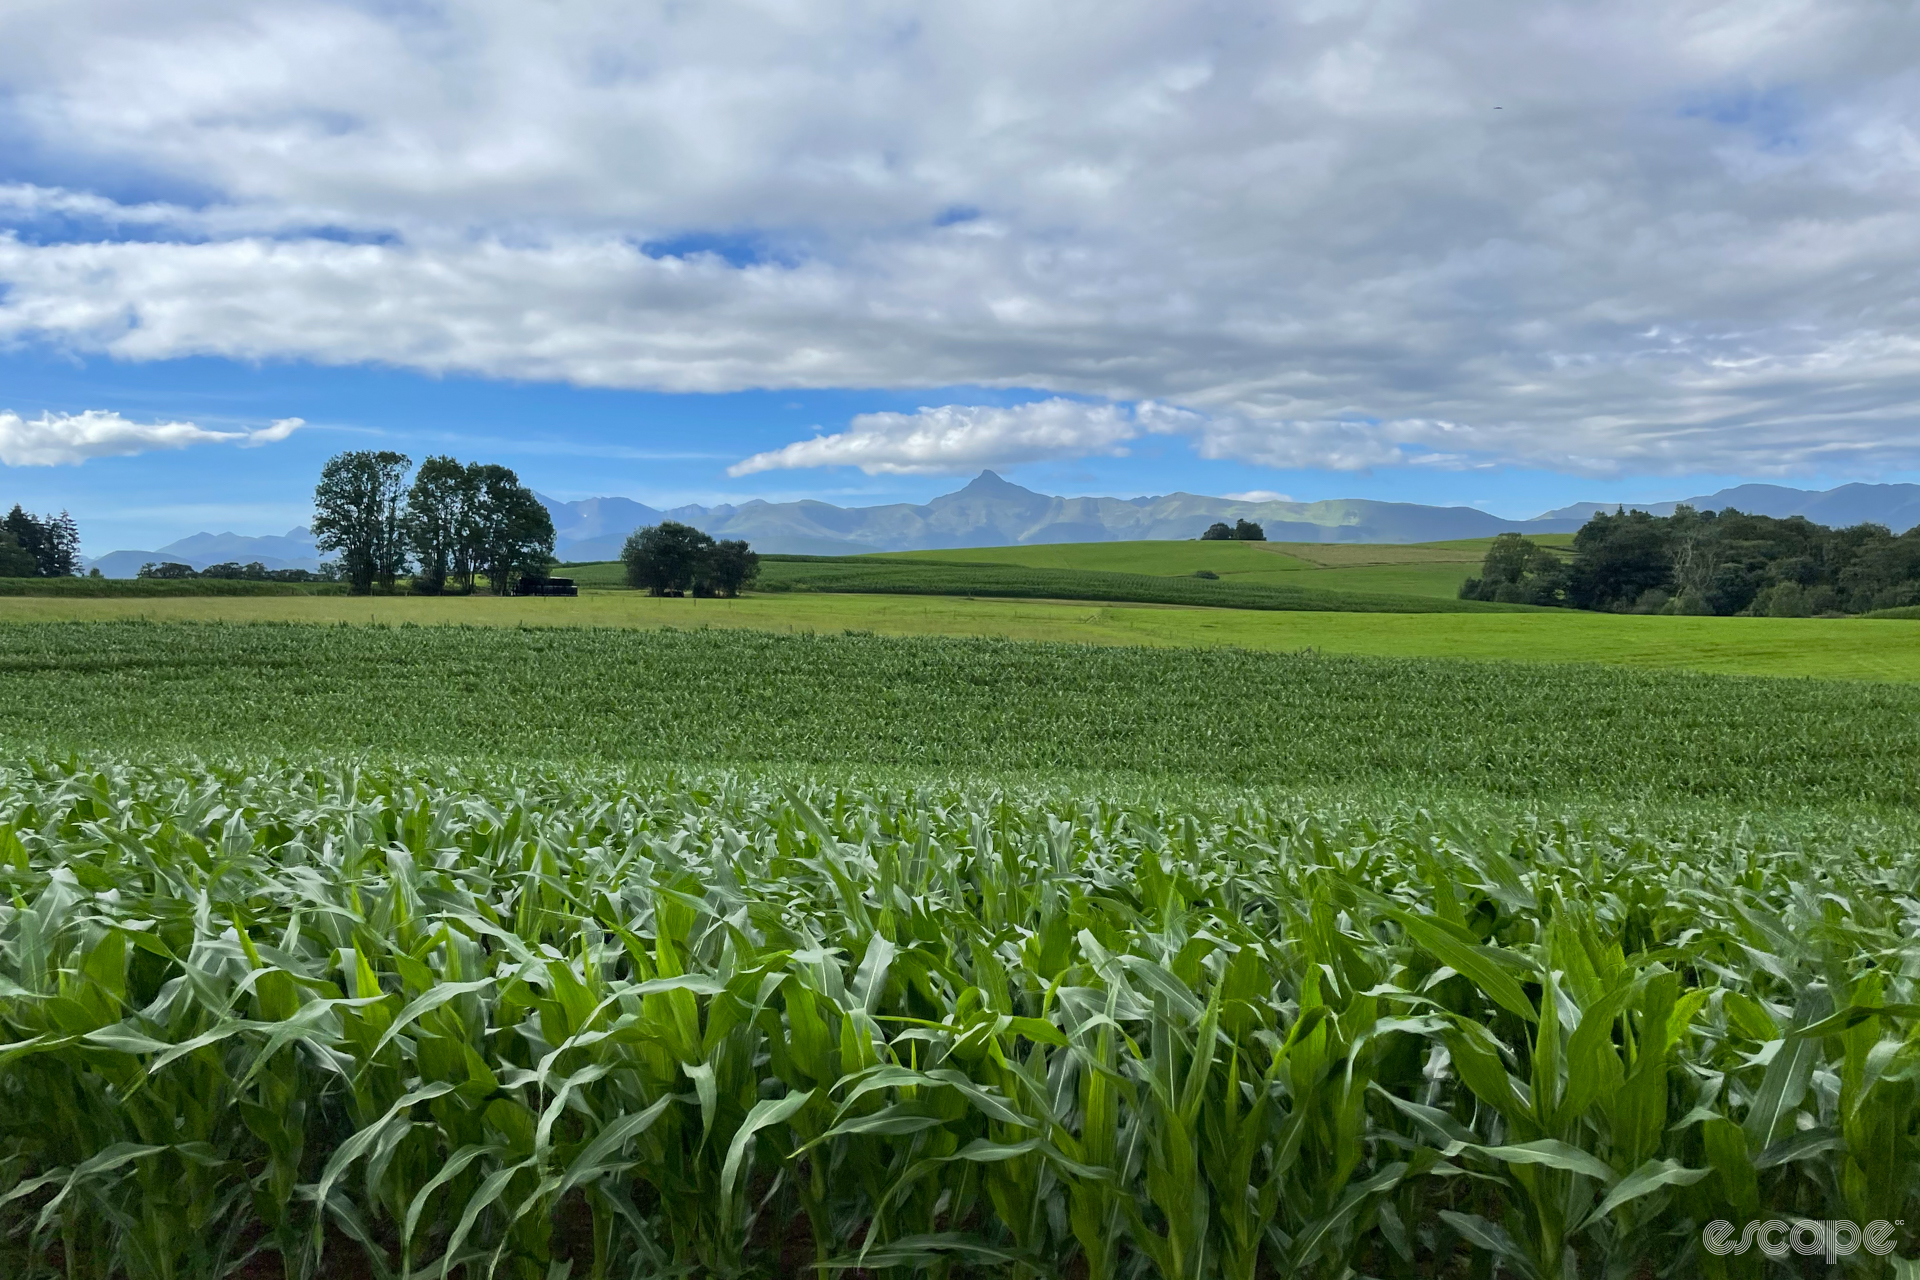 A view toward the Pyrenees from near Lourdes, across rolling green farm fields of corn and wheat, under a sky flecked with clouds.